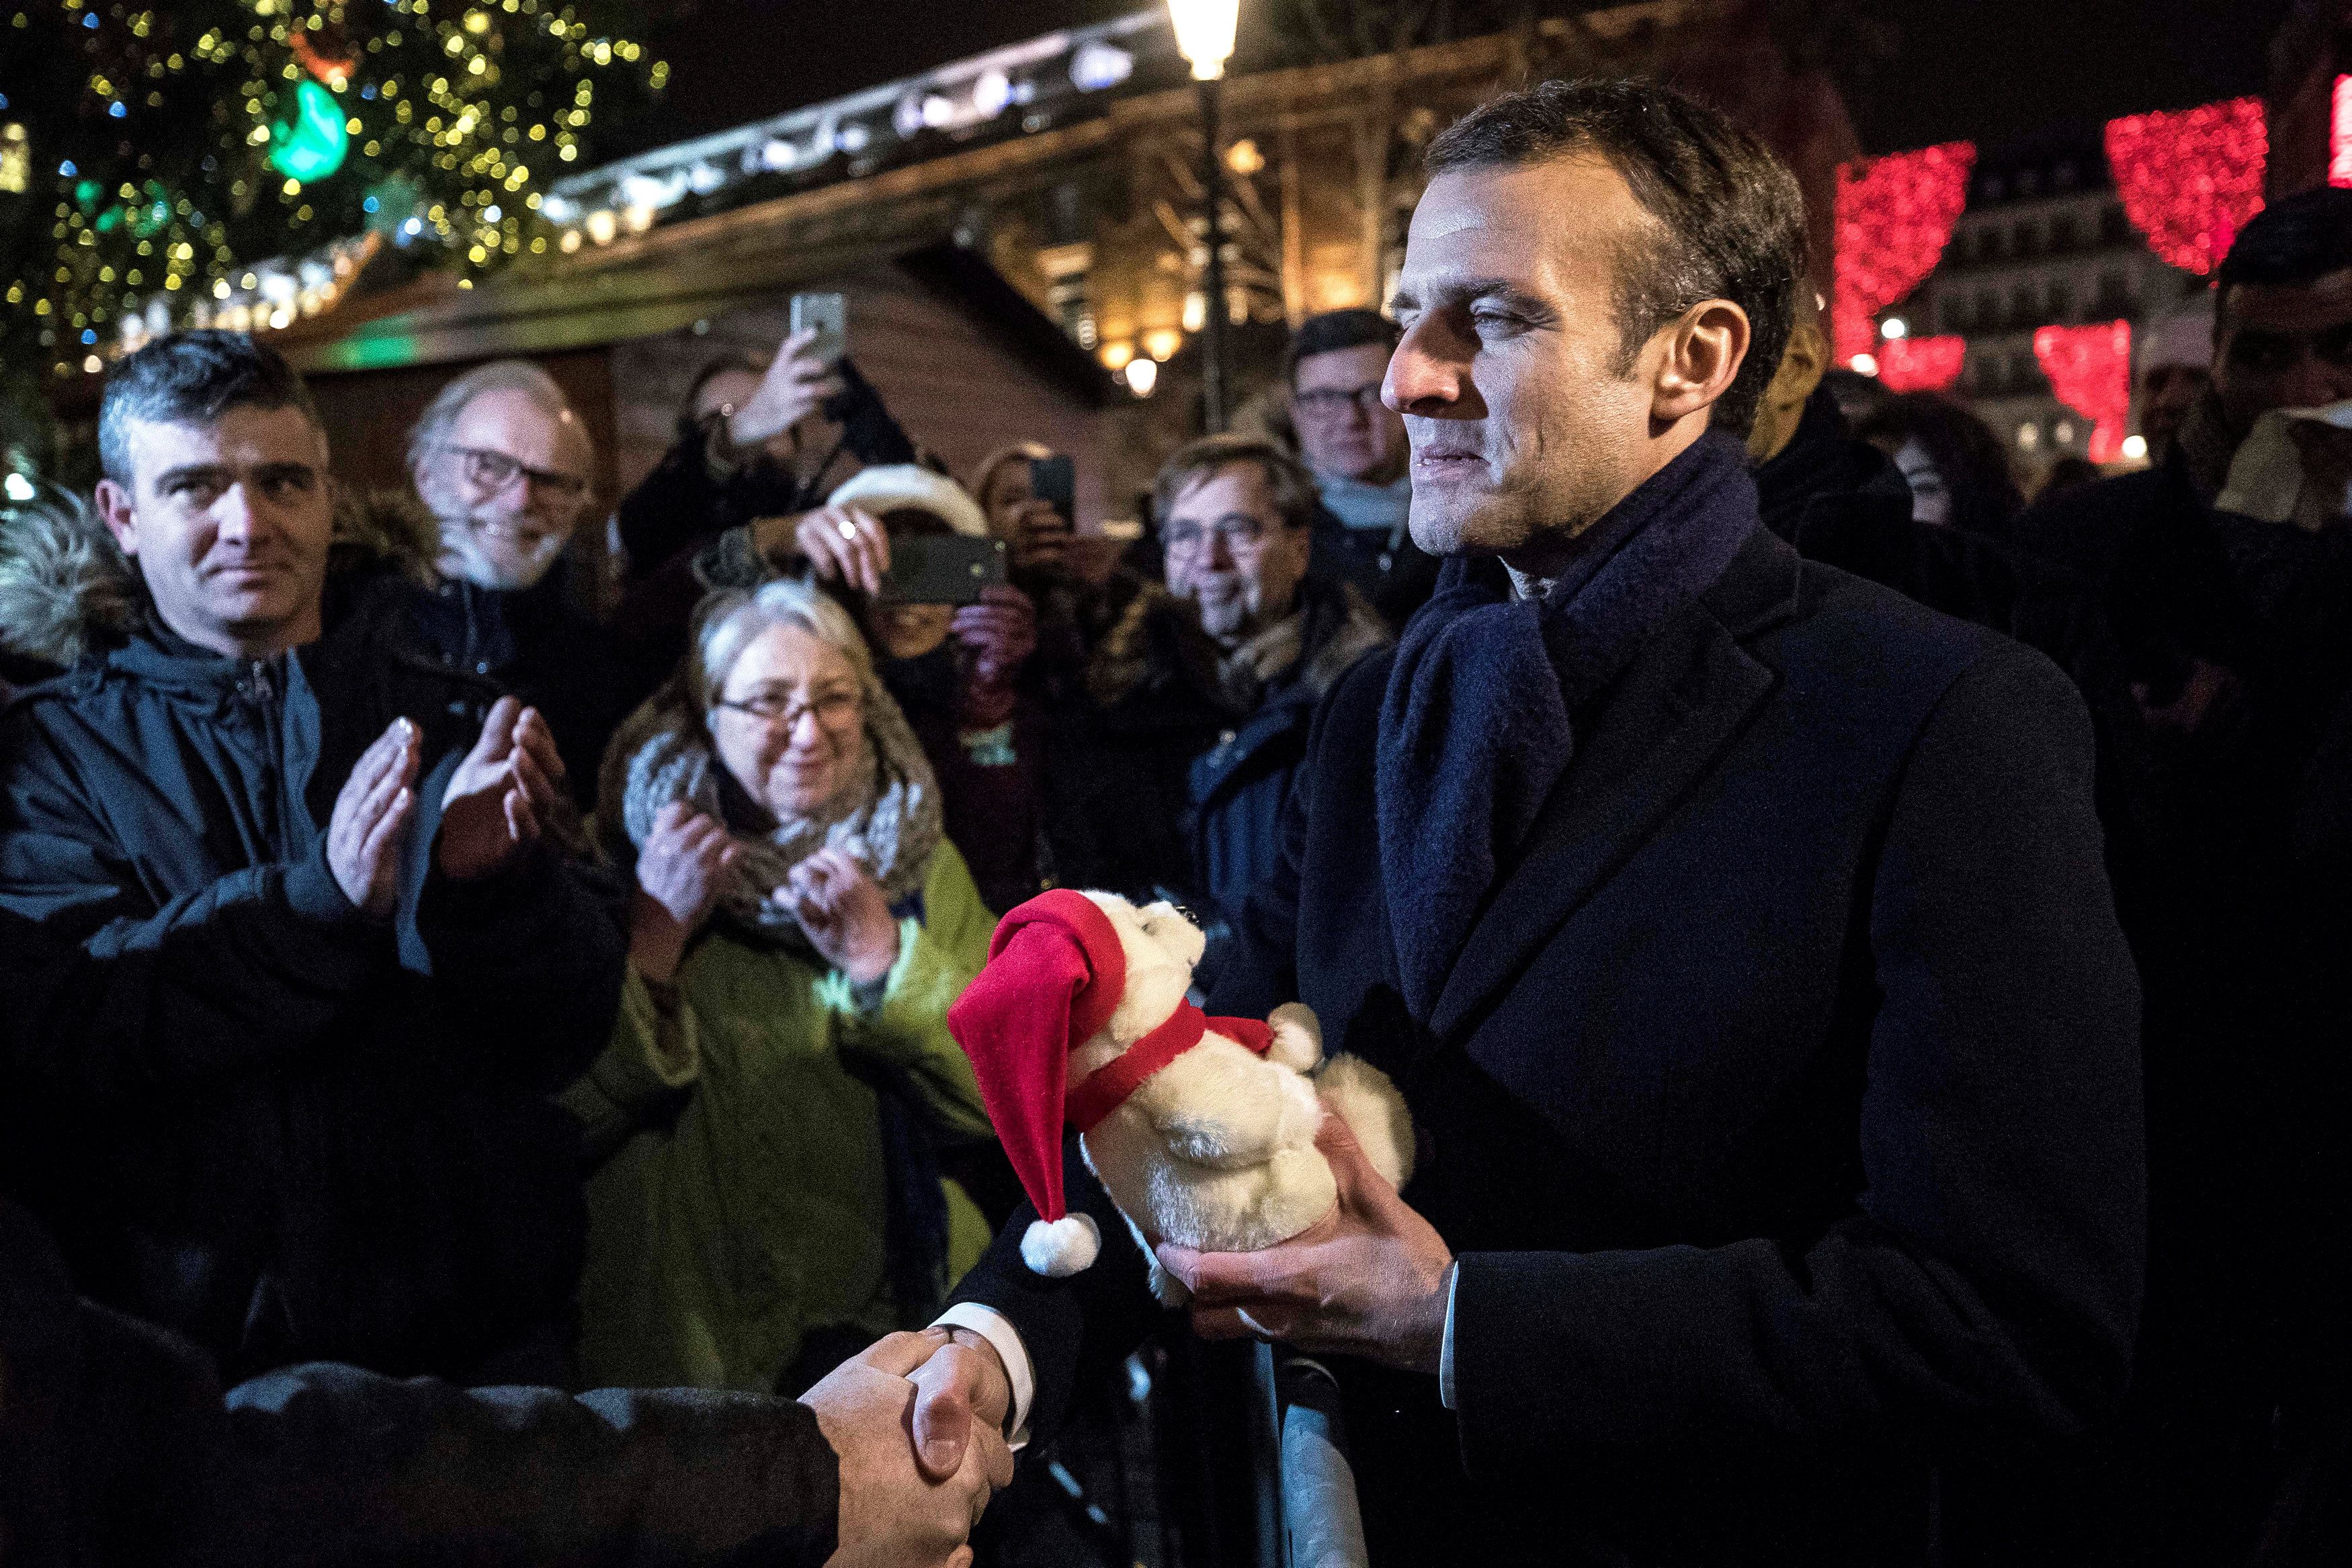 2018-12-14T202922Z_2062155409_RC1F82F4C100_RTRMADP_3_FRANCE-SECURITY-MACRON-CHRISTMAS